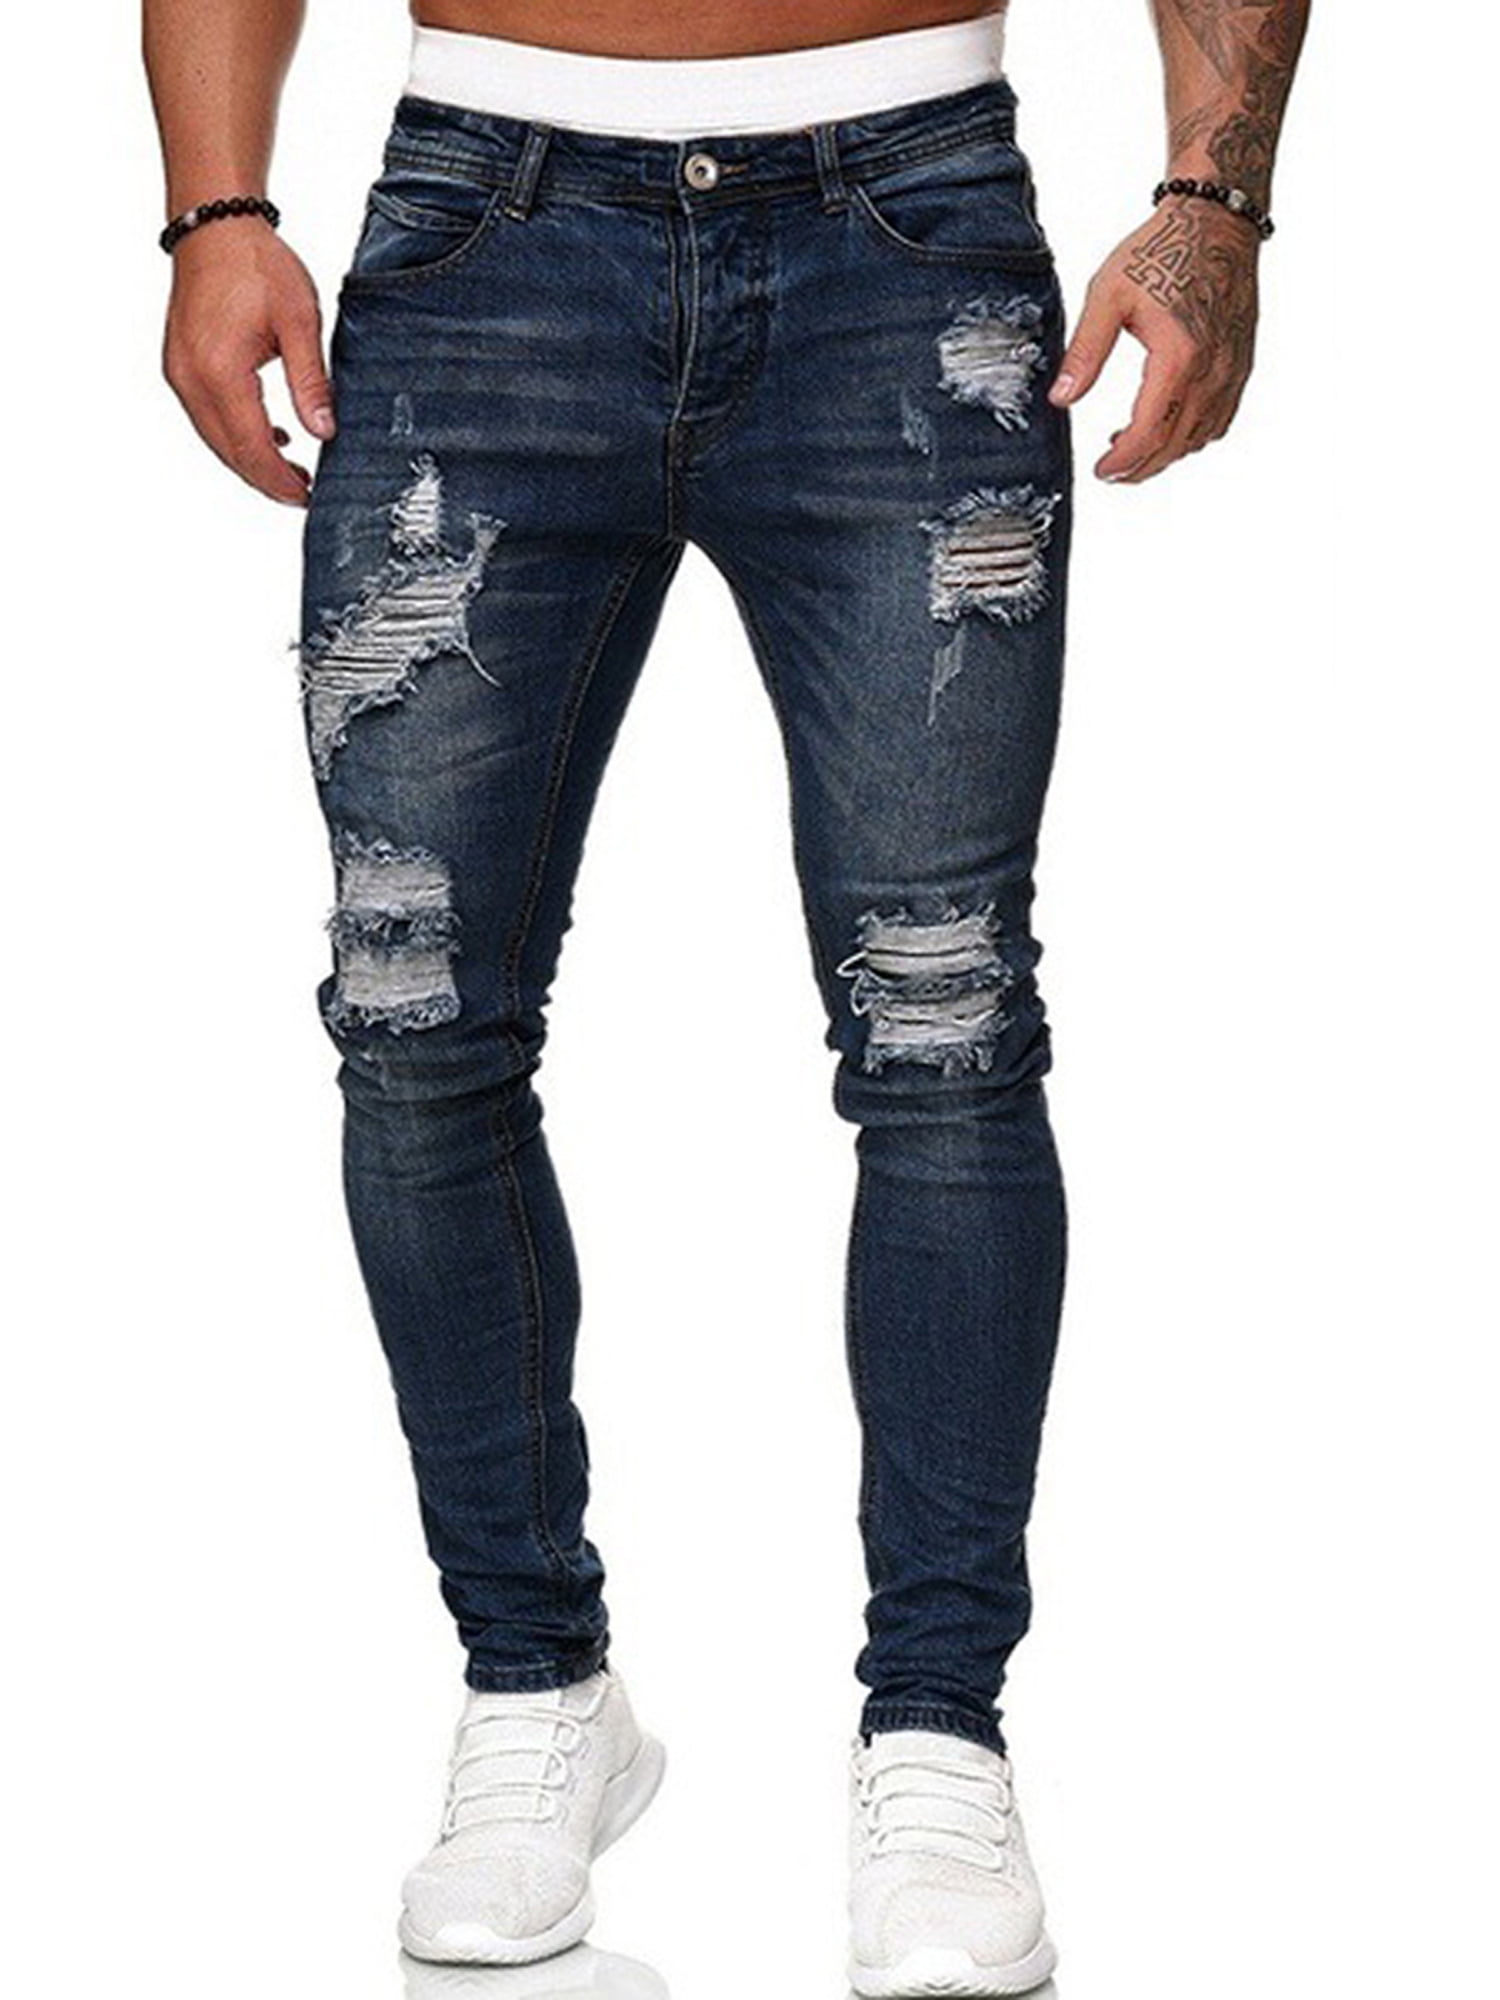 seriously Prick Shipwreck CenturyX Men's Skinny Distressed Ripped Jeans Destroyed Stretchy Knee Holes  Slim Tapered Leg Jeans Dark Blue S - Walmart.com